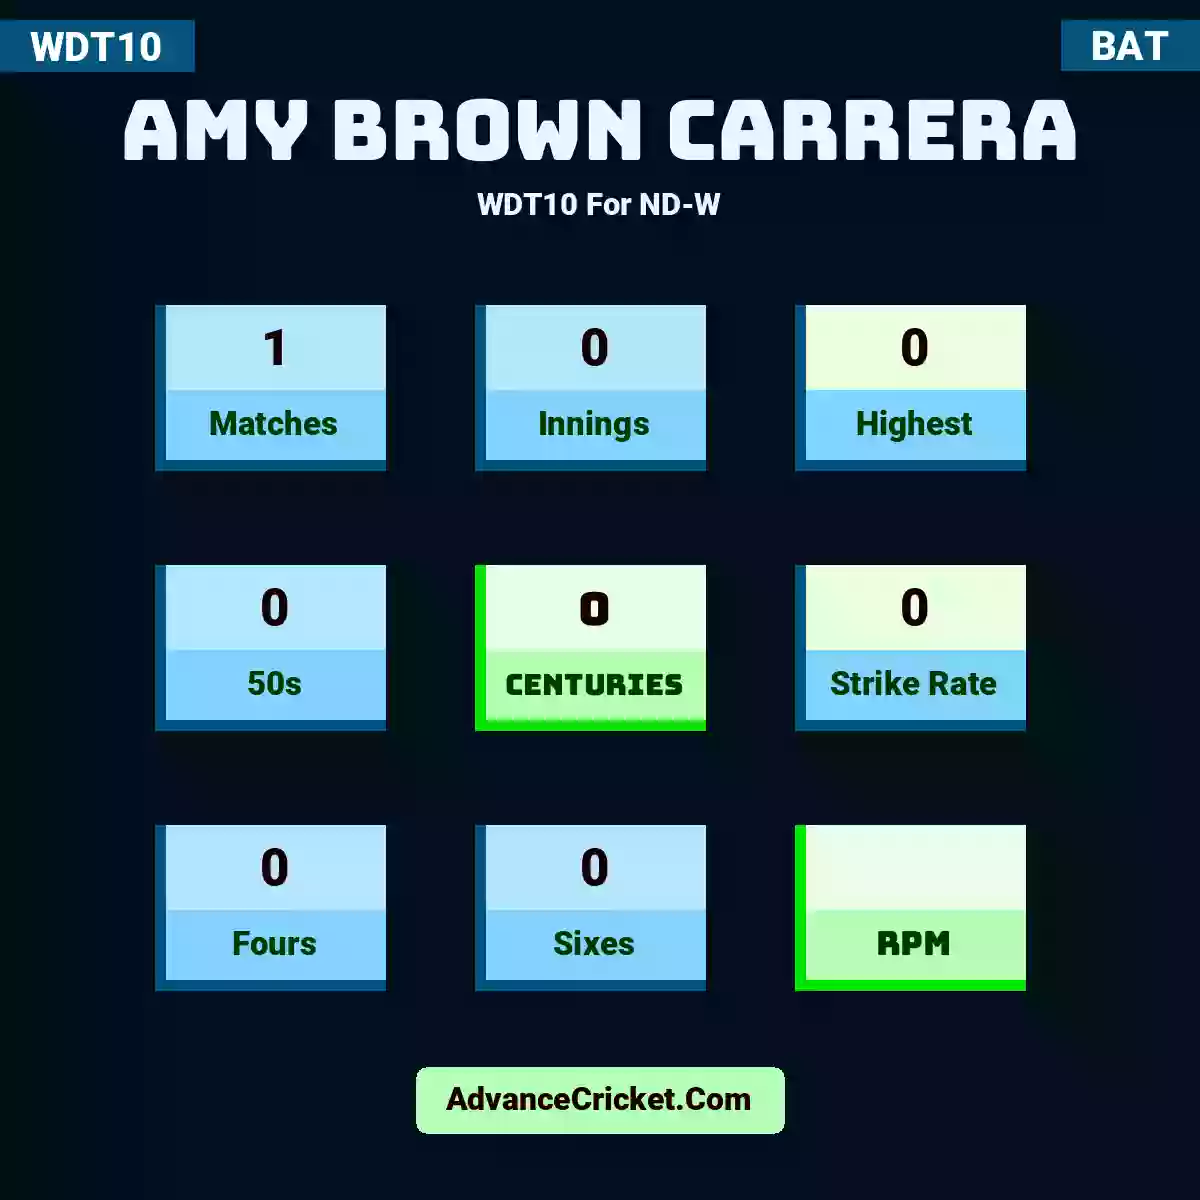 Amy Brown Carrera WDT10  For ND-W, Amy Brown Carrera played 1 matches, scored 0 runs as highest, 0 half-centuries, and 0 centuries, with a strike rate of 0. A.Brown-Carrera hit 0 fours and 0 sixes.